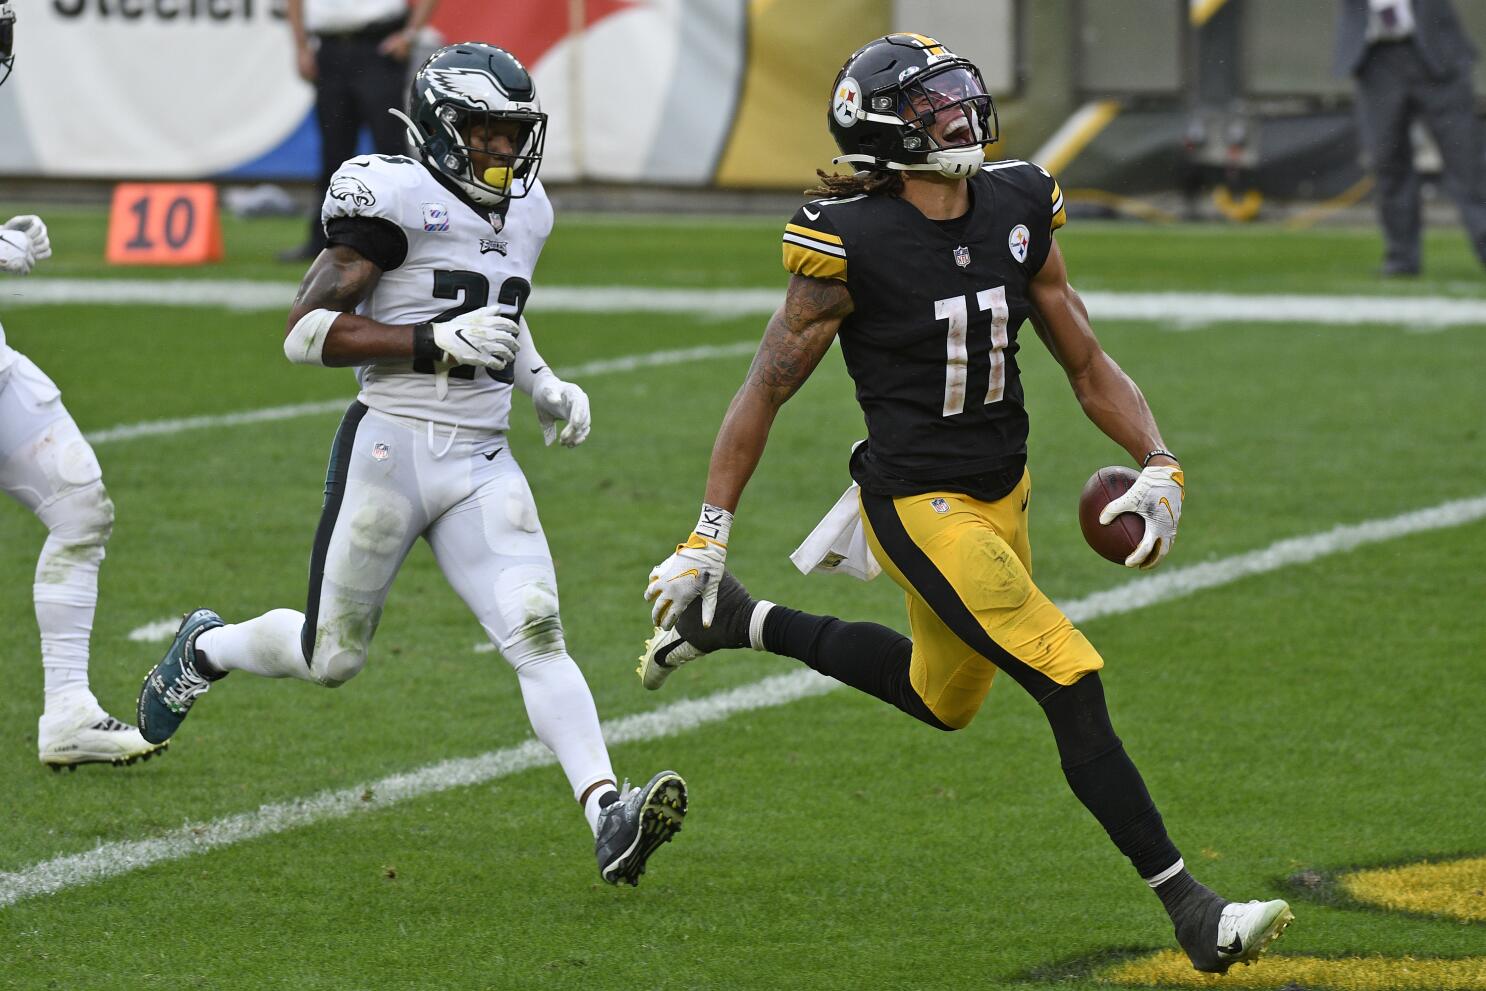 Dismal defense costs depleted Eagles in loss to Steelers - The San